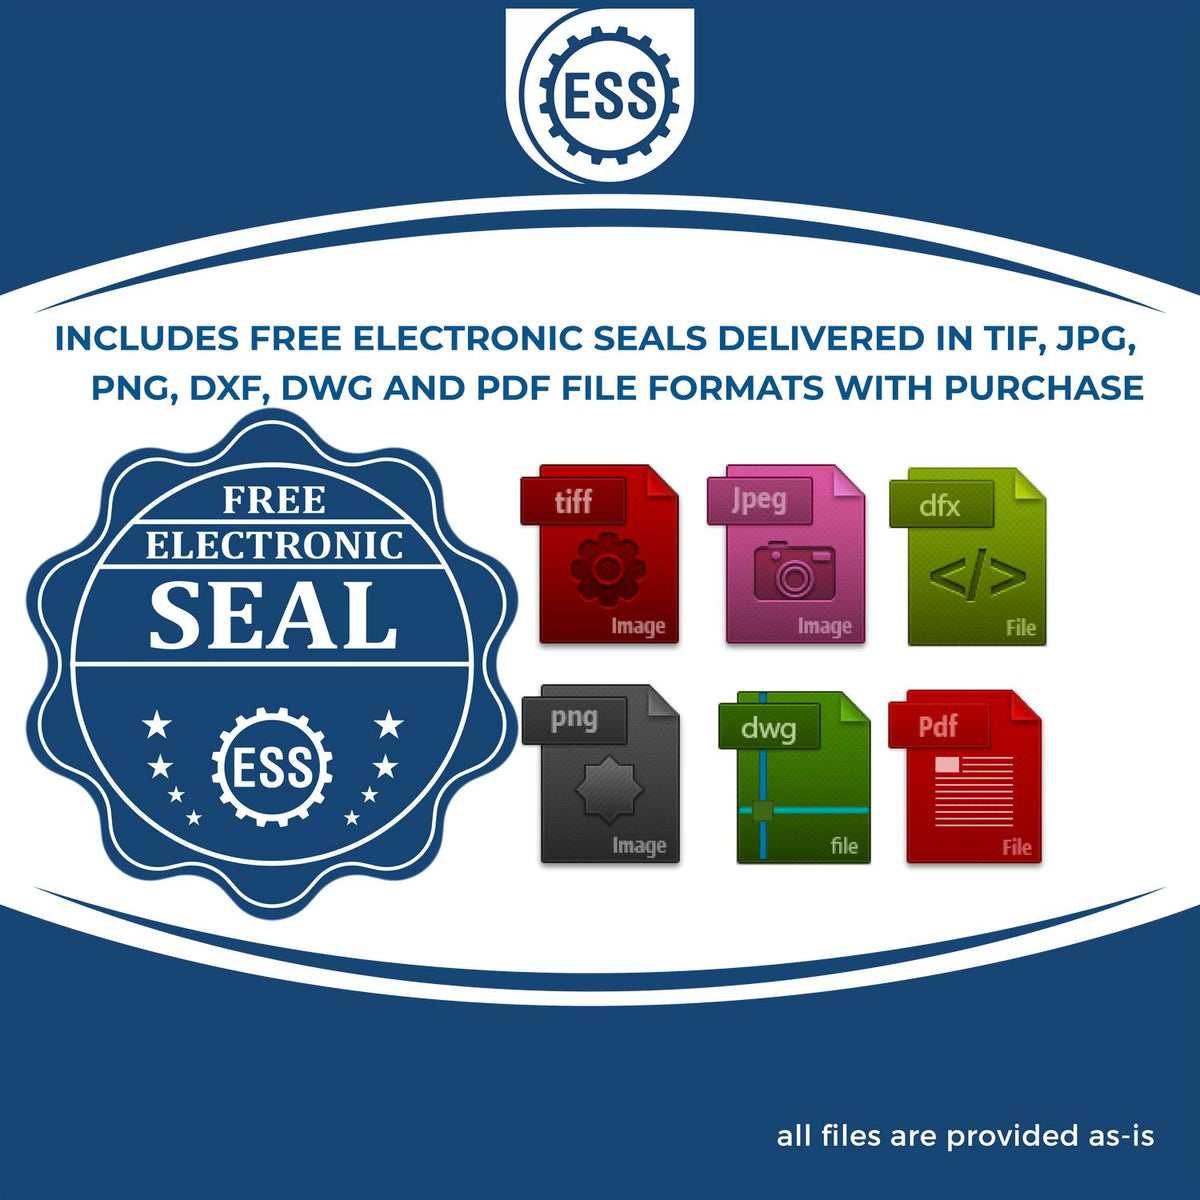 An infographic for the free electronic seal for the Soft Oklahoma Professional Engineer Seal illustrating the different file type icons such as DXF, DWG, TIF, JPG and PNG.